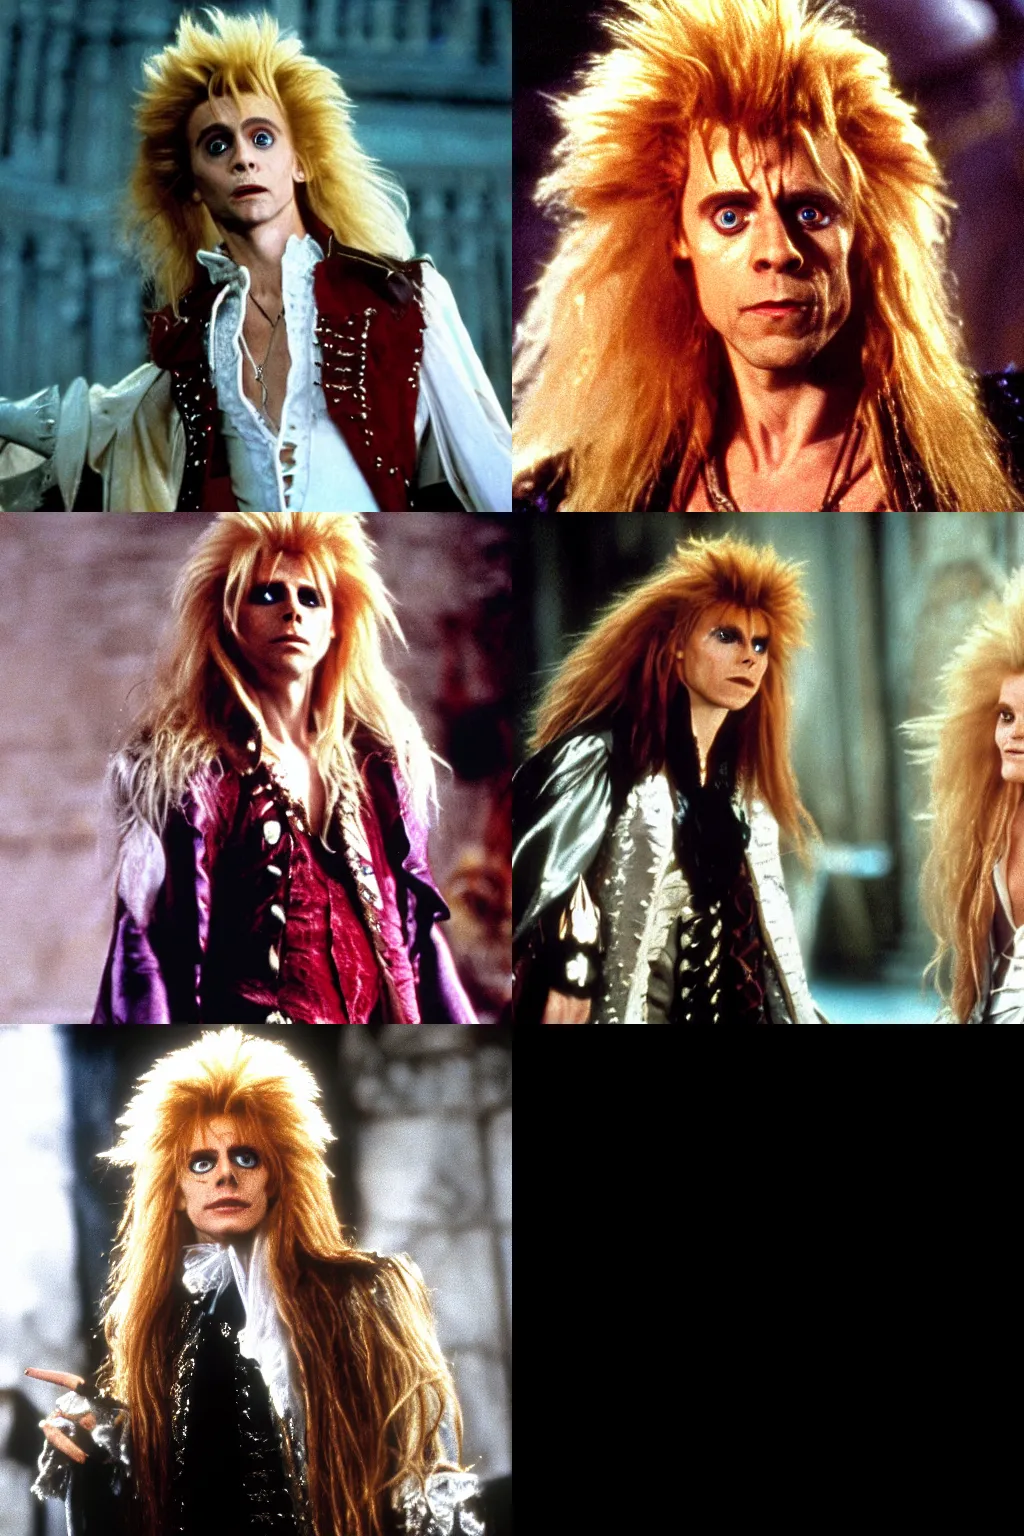 Prompt: Tom Hiddleston as Jareth, the Goblin King from Labyrinth (1986), movie adversitement in Netflix